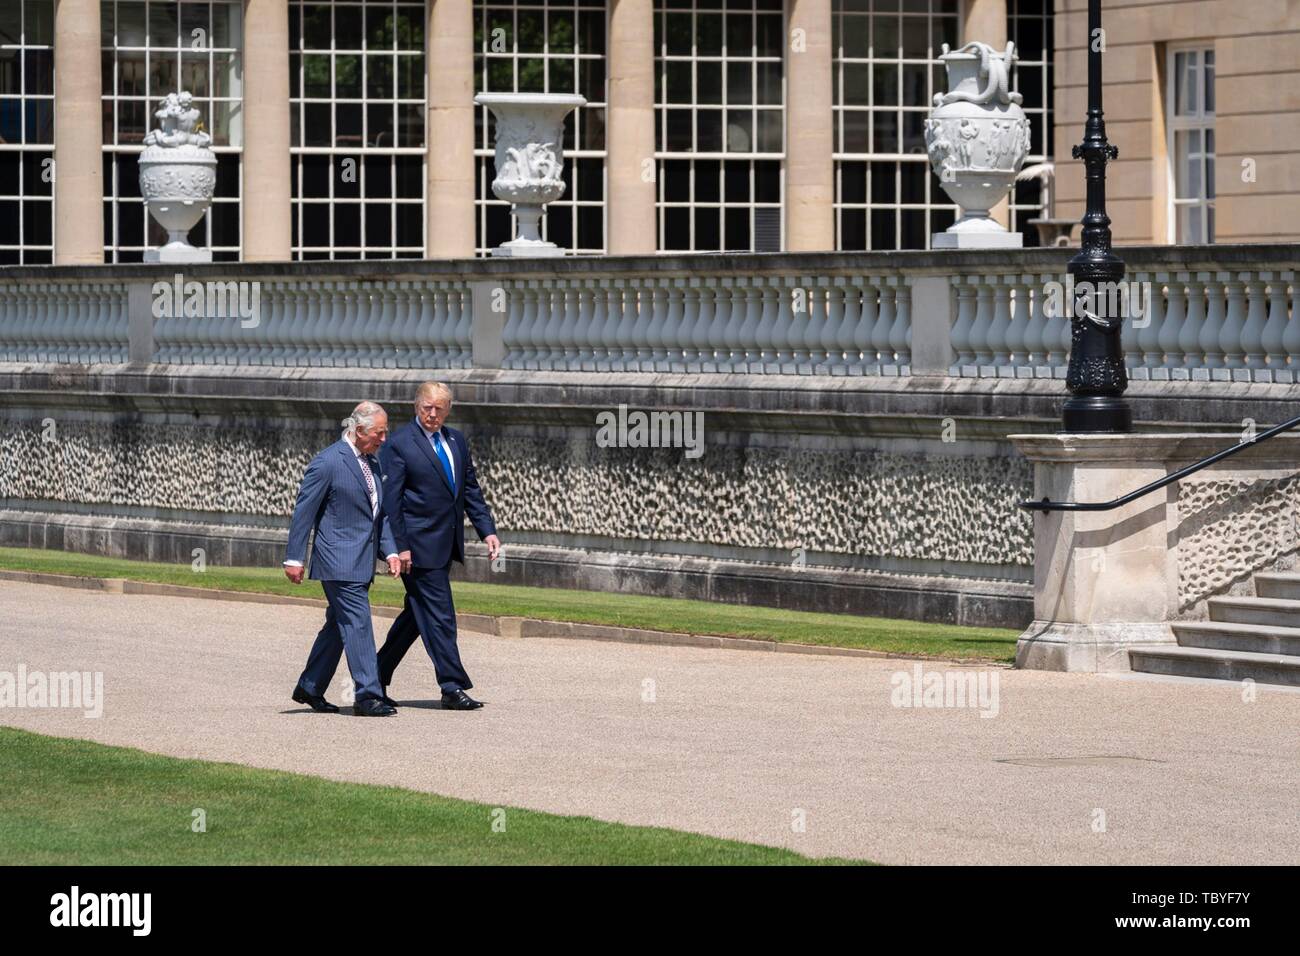 London, UK. 03rd June, 2019. U.S President Donald Trump walks with HRH Prince Charles on arrival at Buckingham Palace for the official welcome ceremony June 3, 2019 in London, England. Credit: Planetpix/Alamy Live News Stock Photo